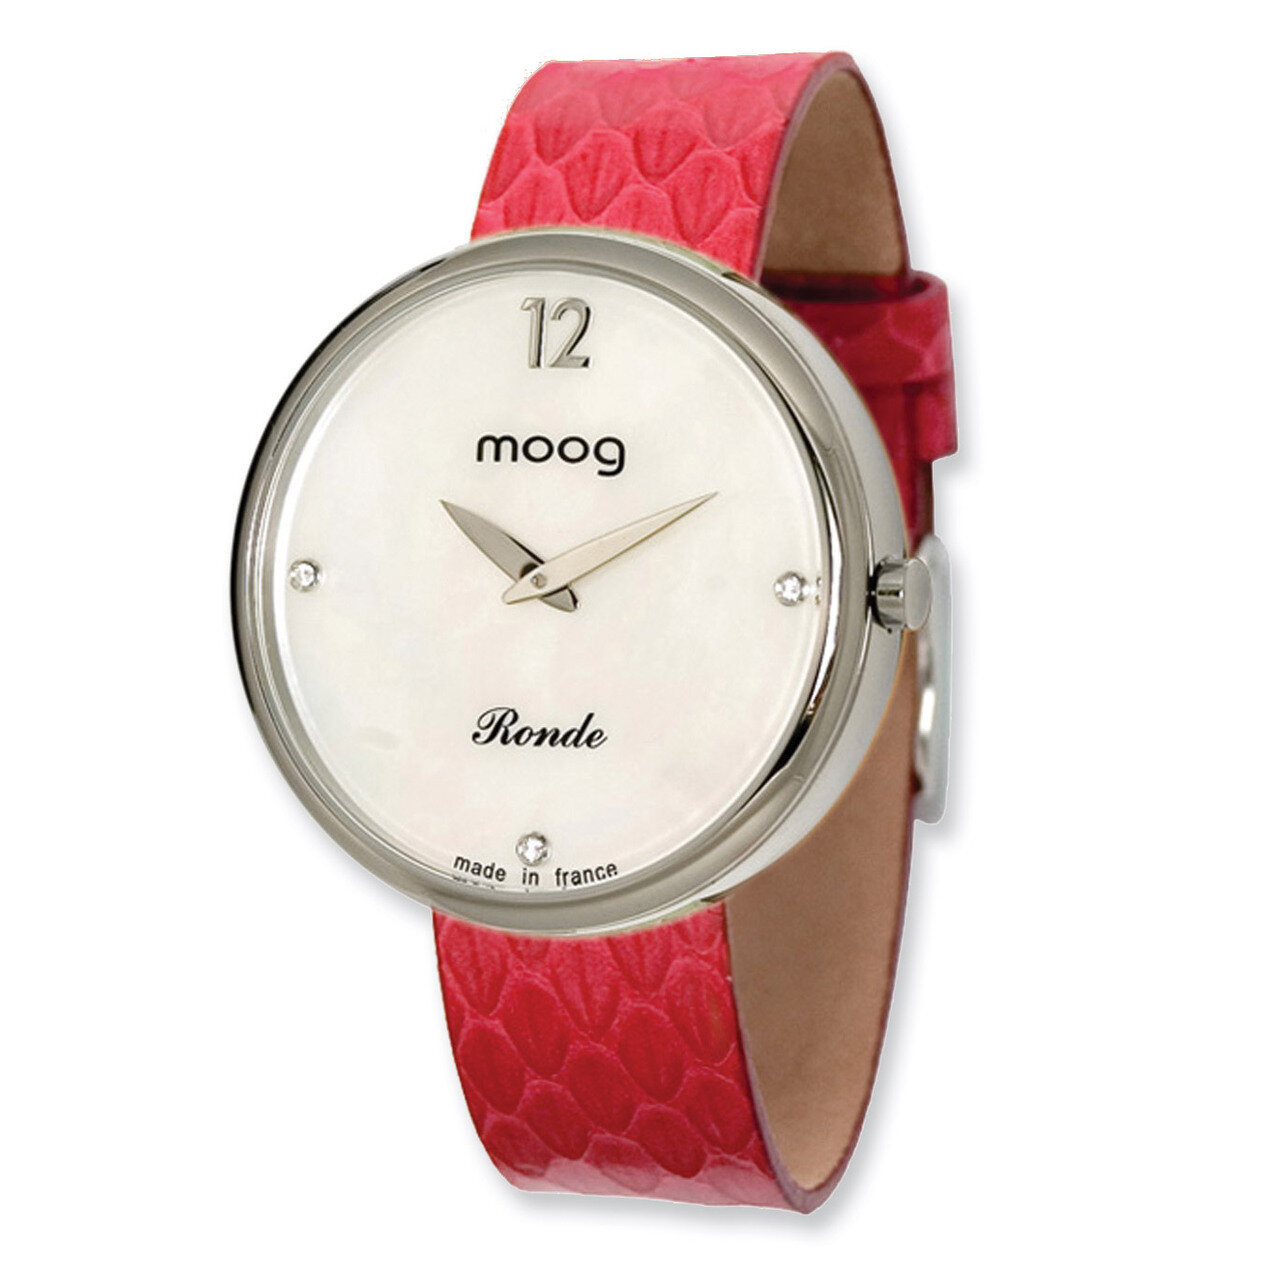 Moog Stainless Steel Round White Dial Watch with (SN-02) Red Band